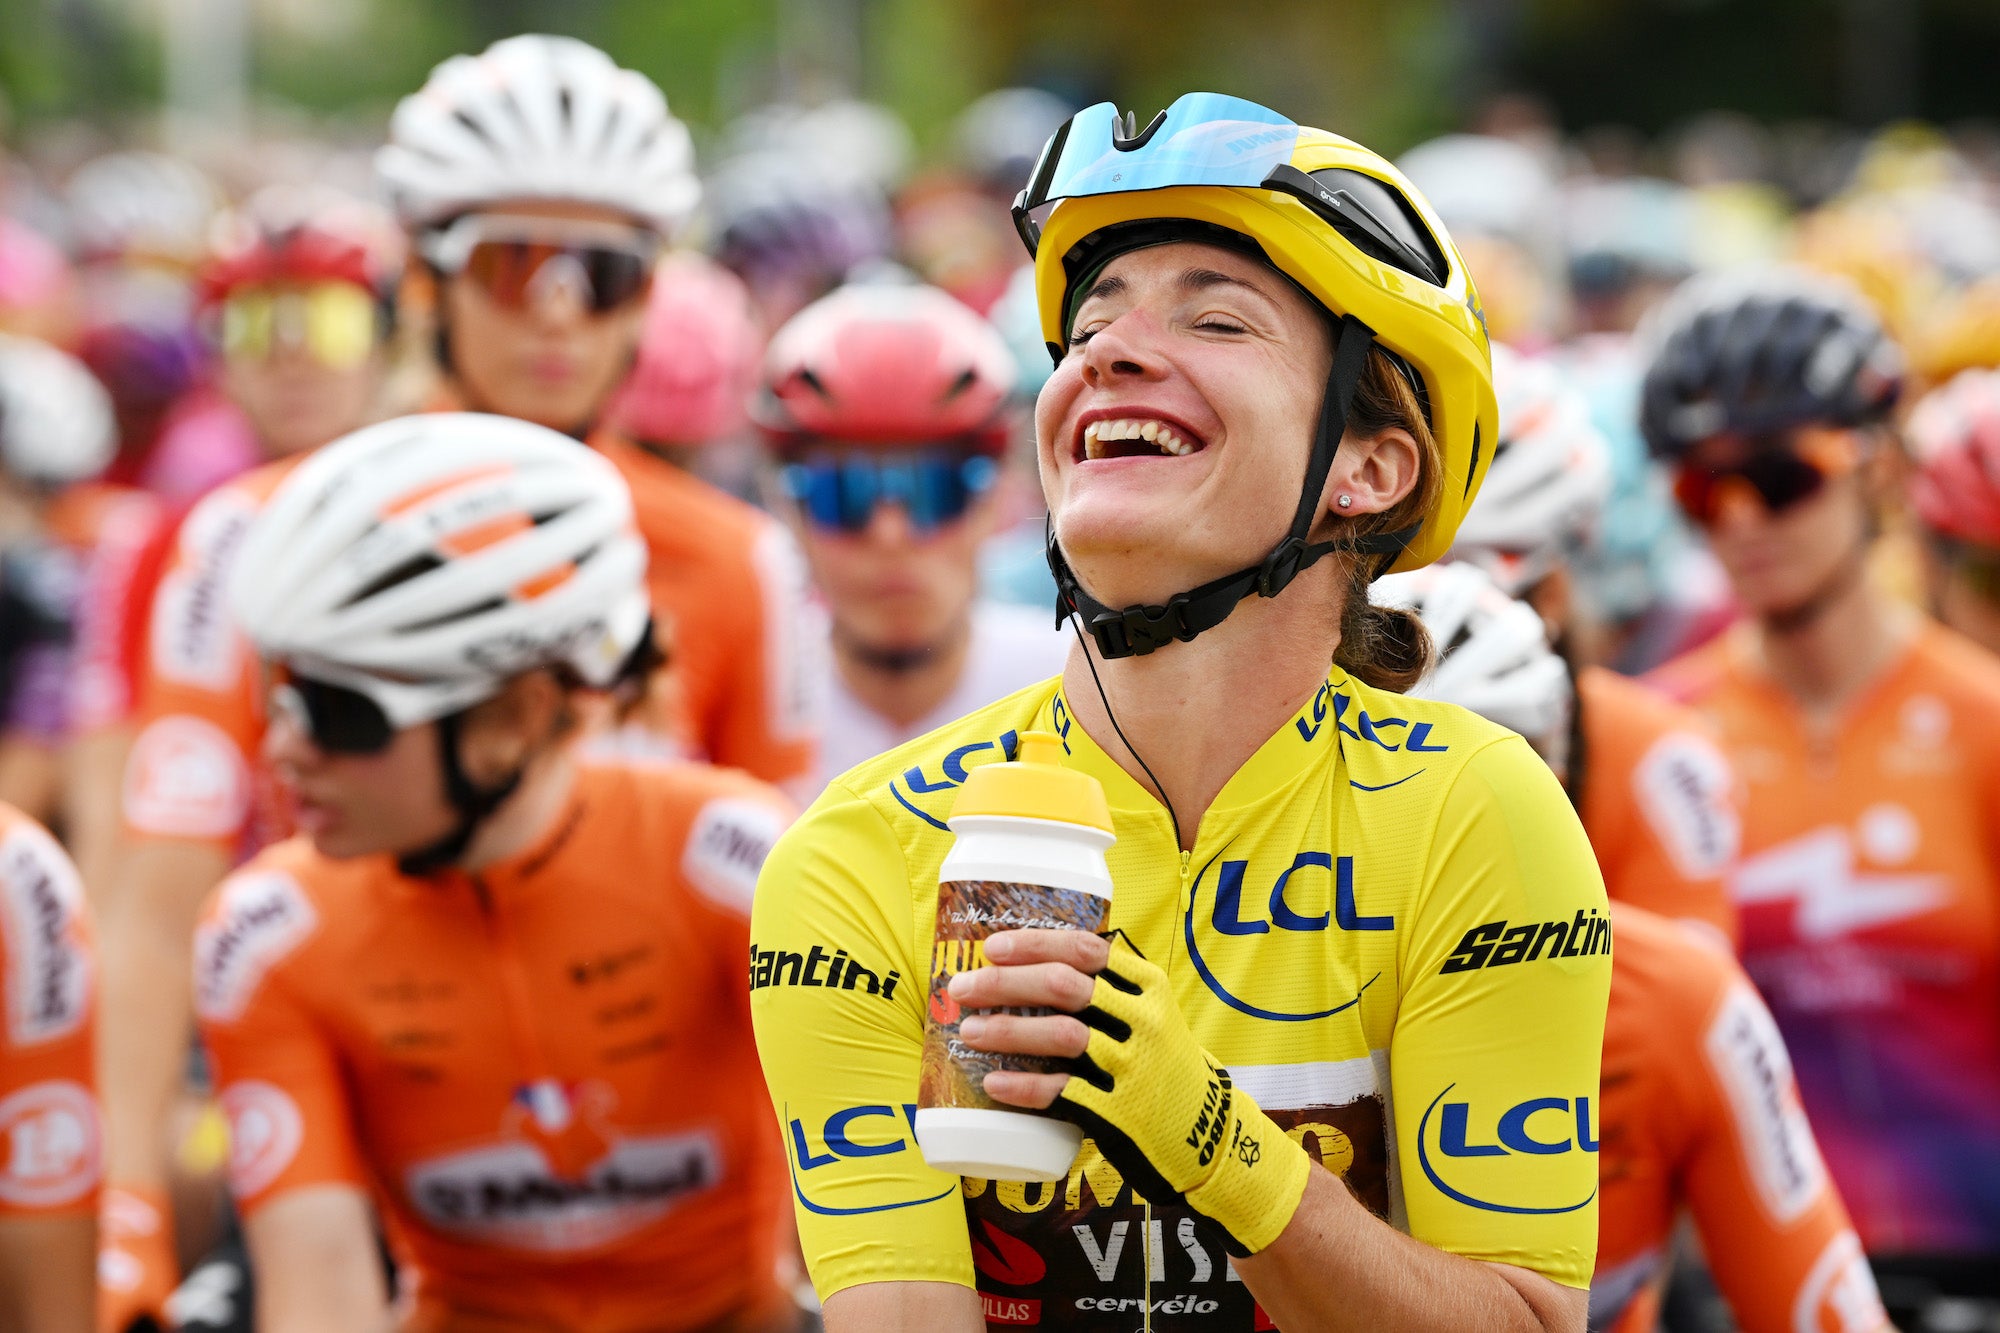 Marianne Vos in yellow: 241 victories but 'for now this is